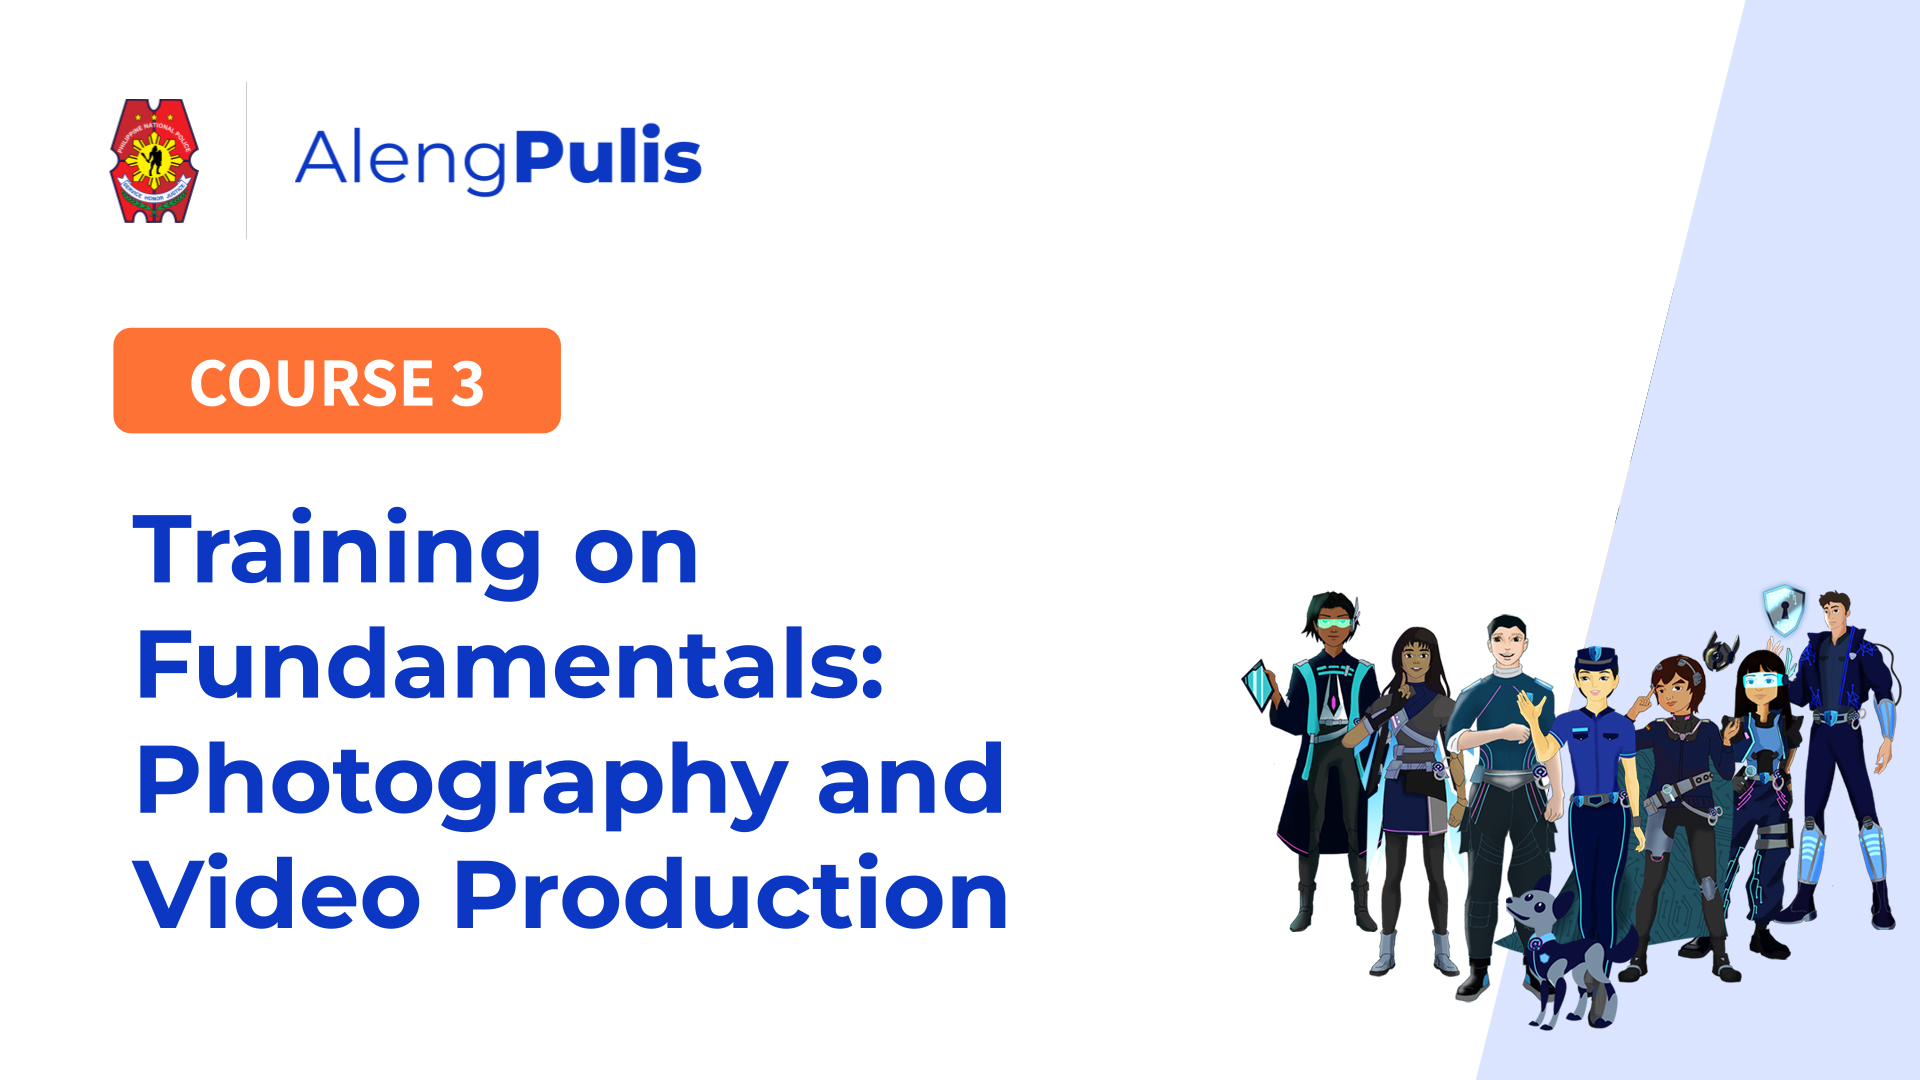 Training on Fundamentals: Photography and Video Production